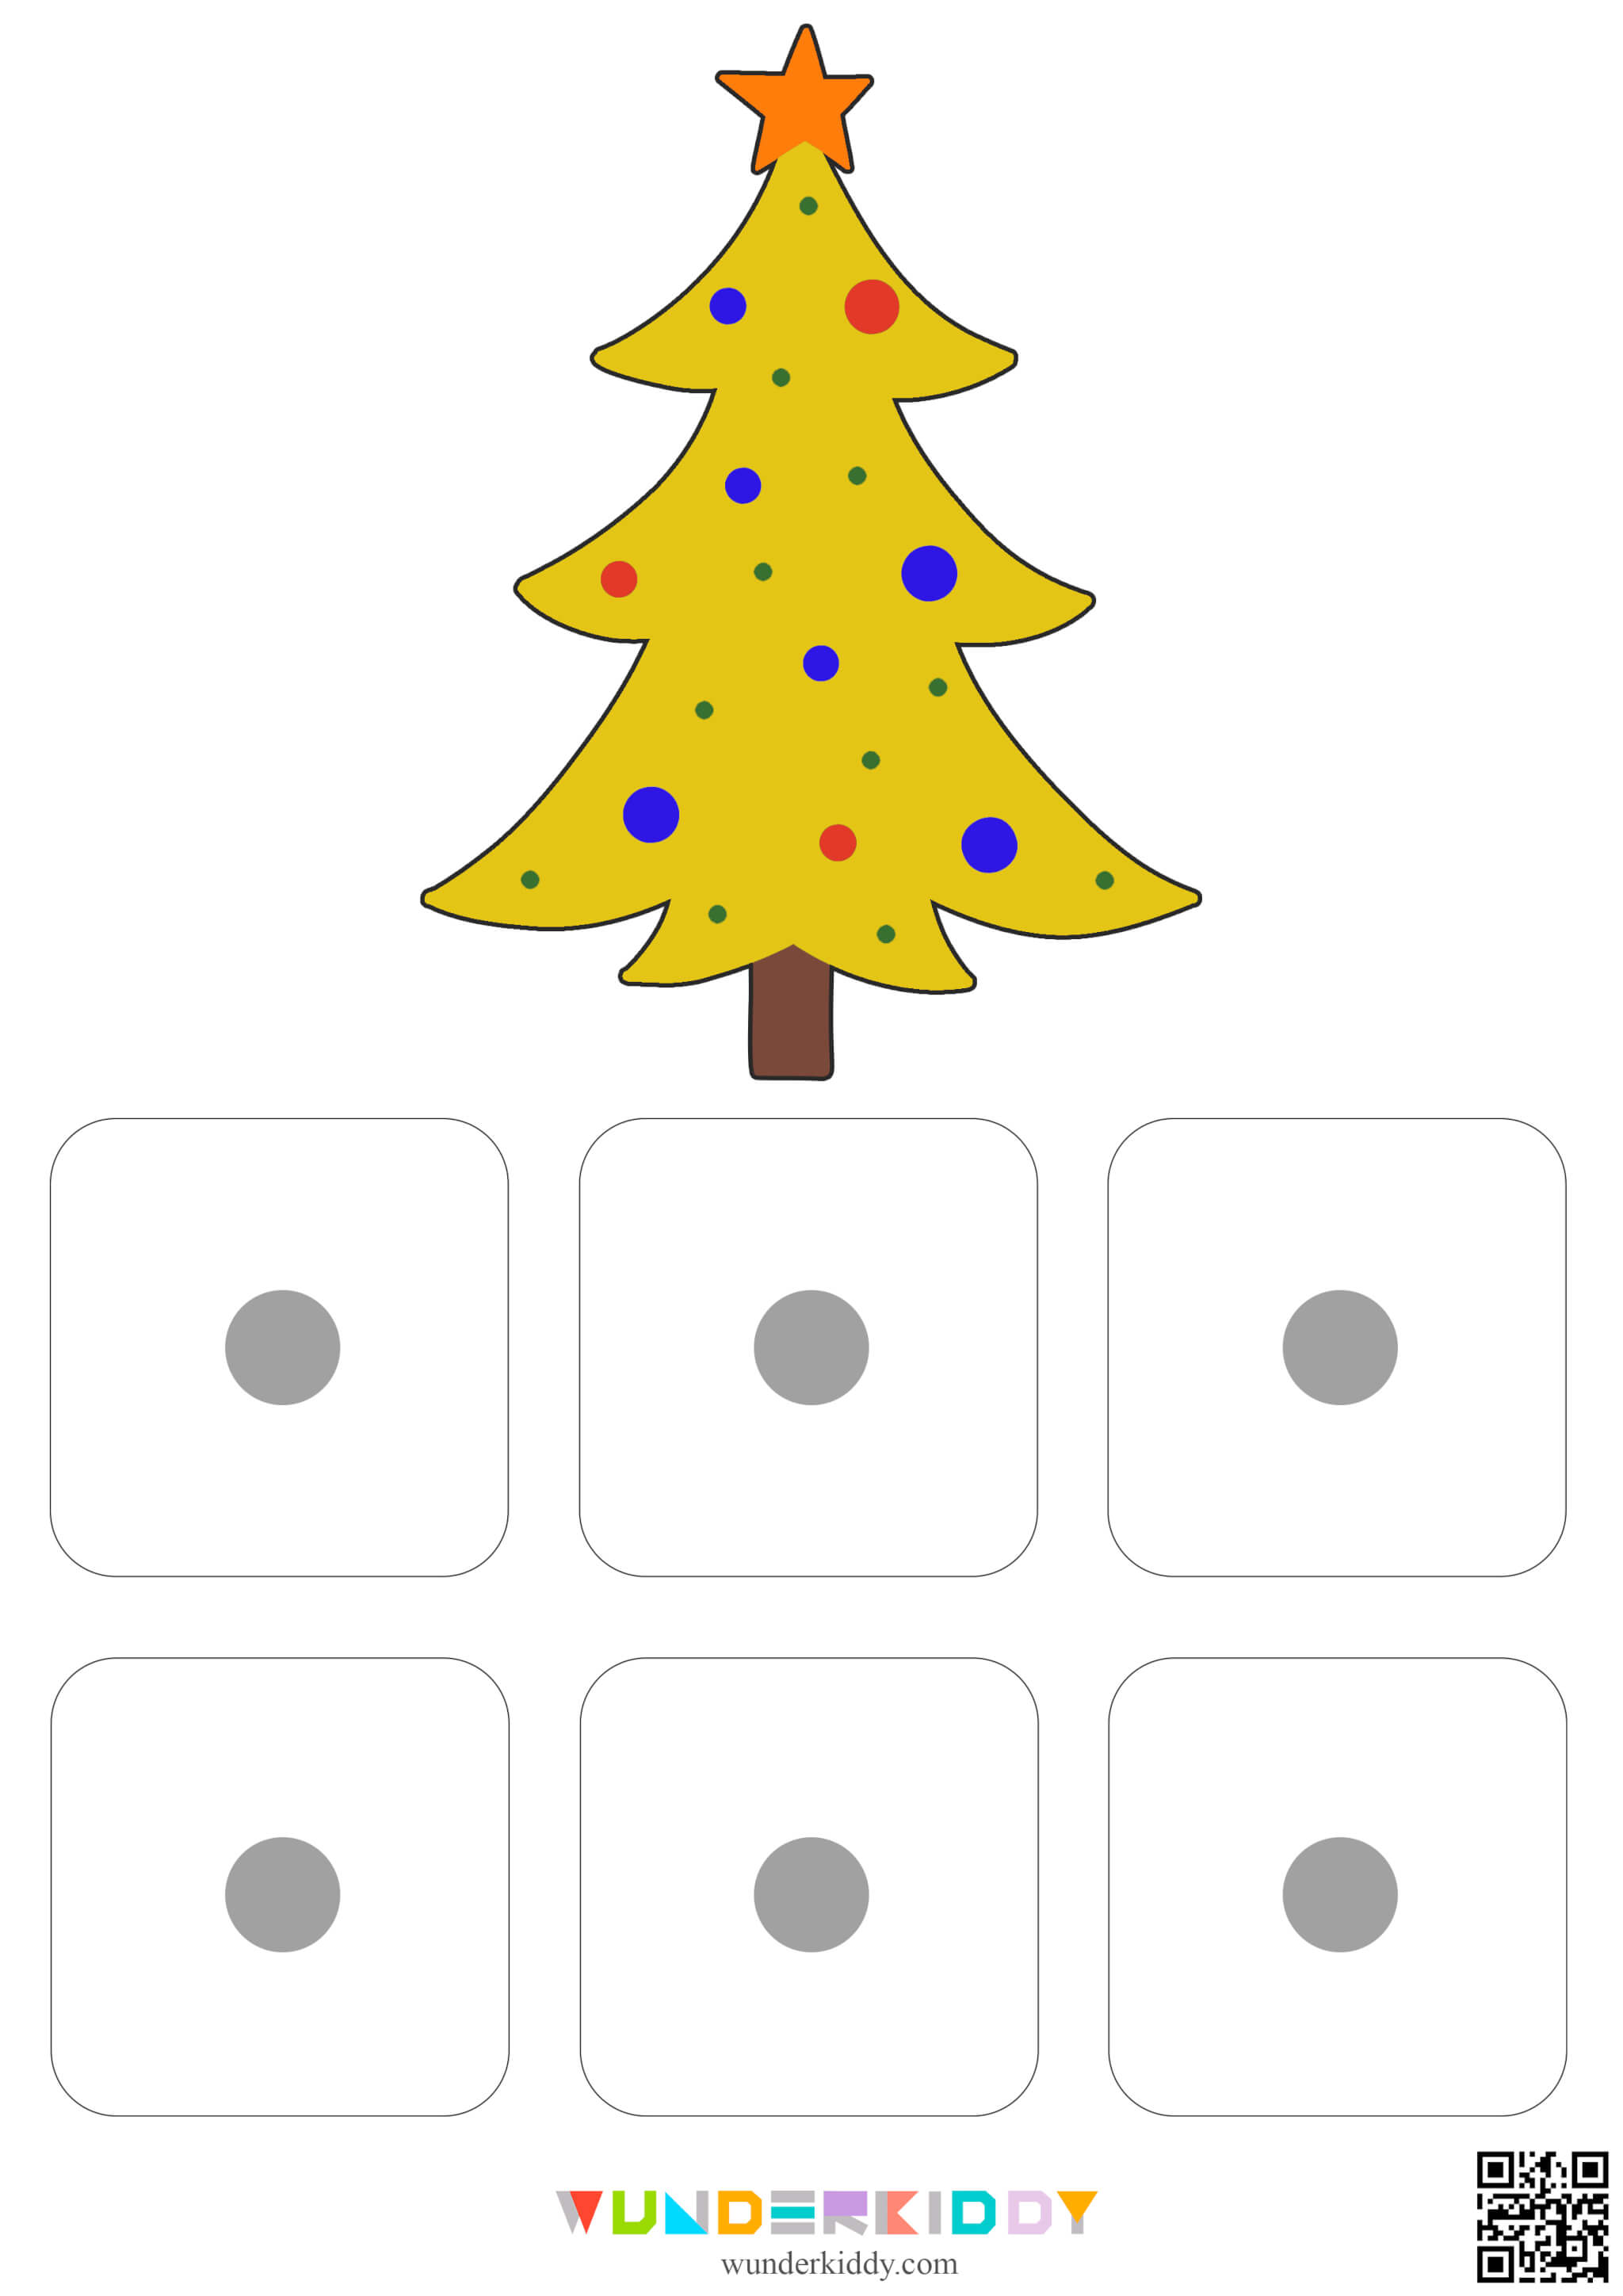 Christmas Color Sorting Activity - Image 7